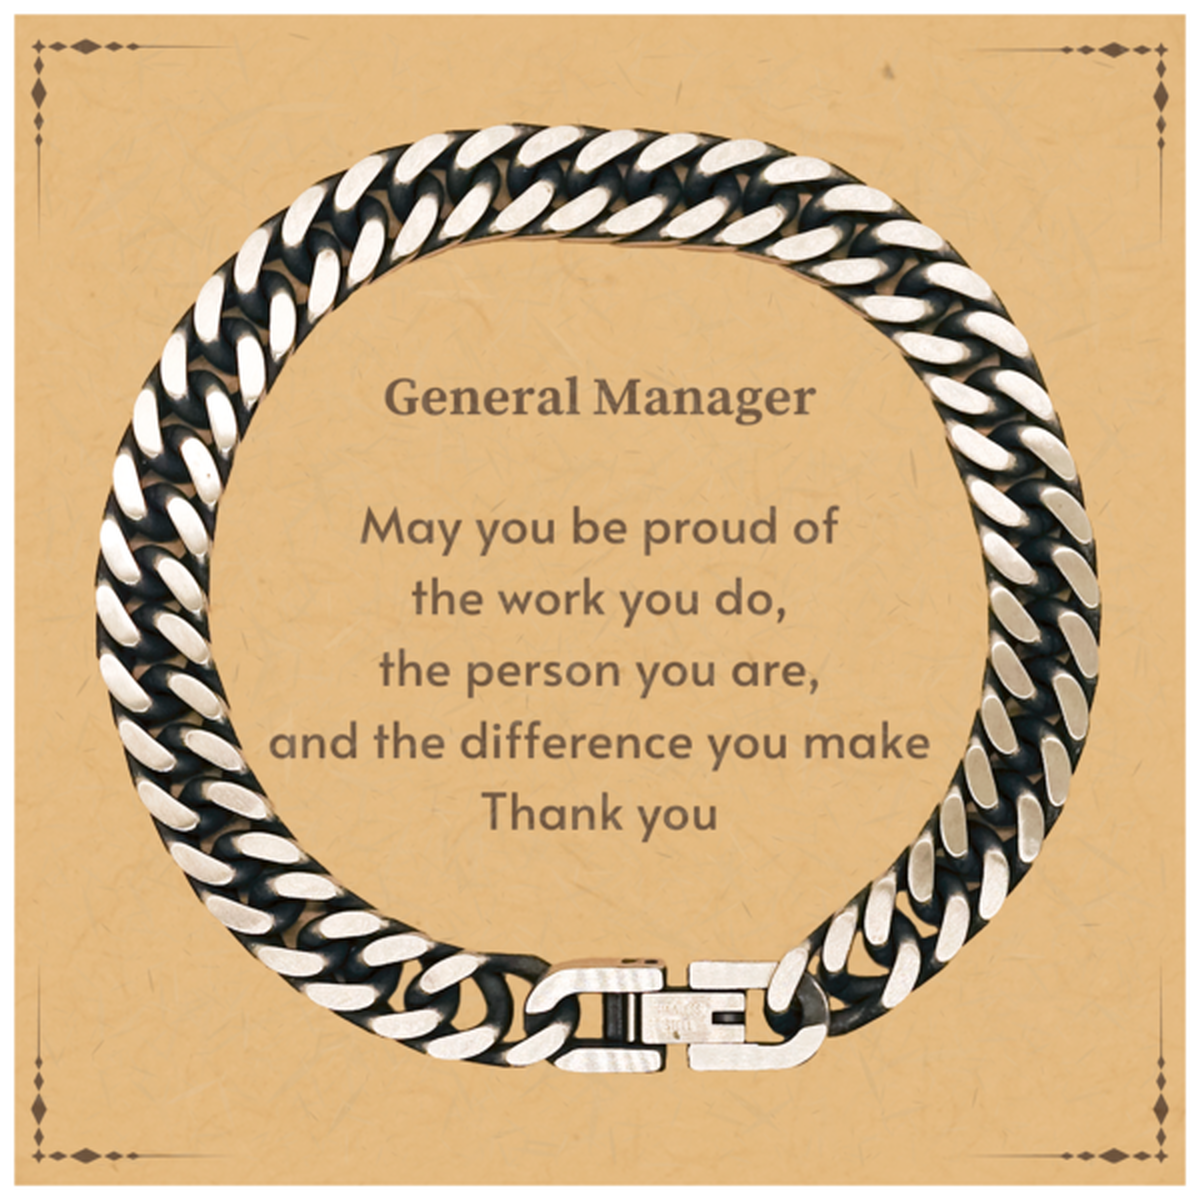 Heartwarming Cuban Link Chain Bracelet Retirement Coworkers Gifts for General Manager, General Manager May You be proud of the work you do, the person you are Gifts for Boss Men Women Friends